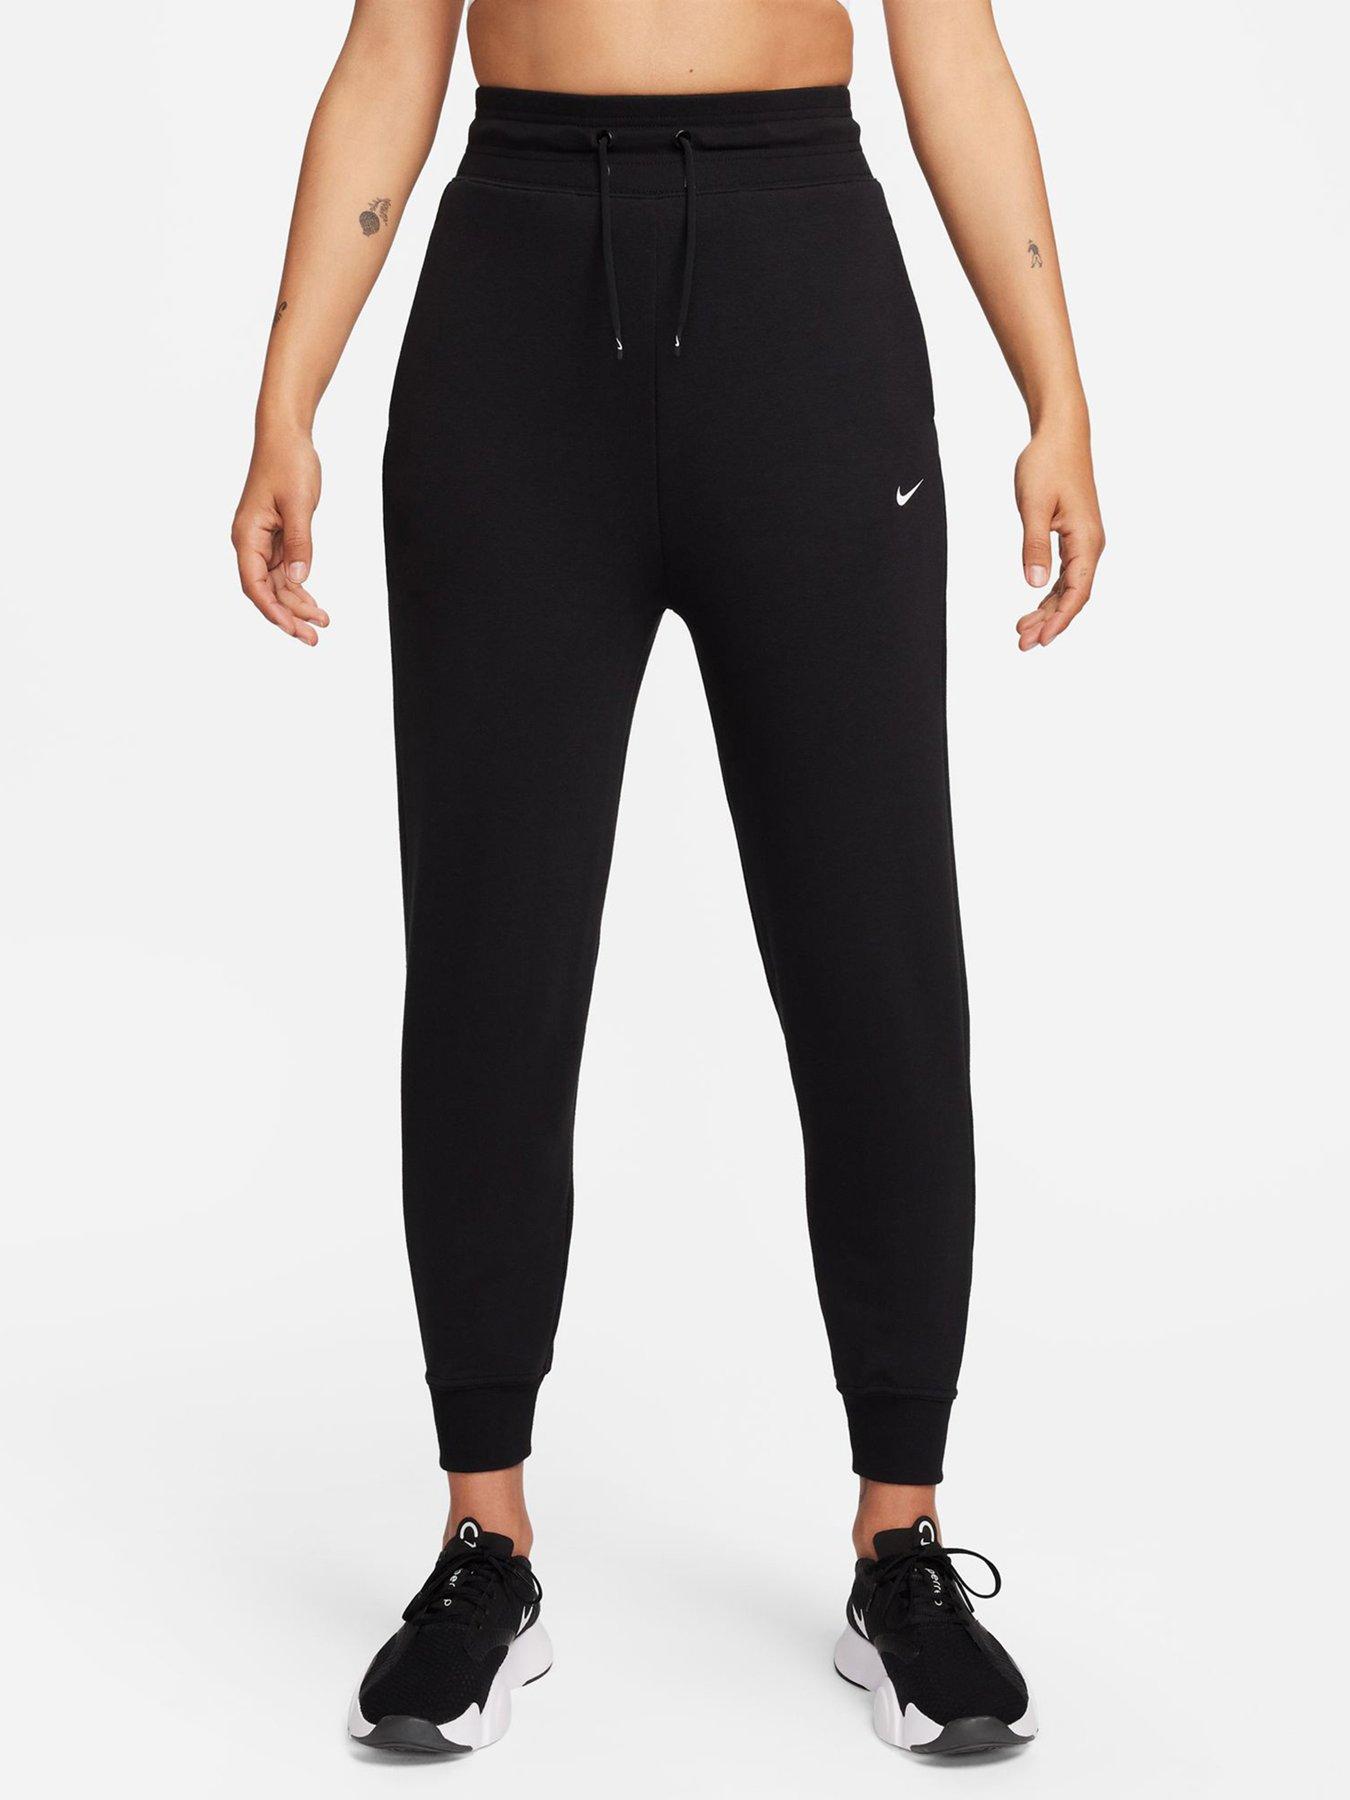 Nike Black Flare Leggings Size XL - $75 - From Briss